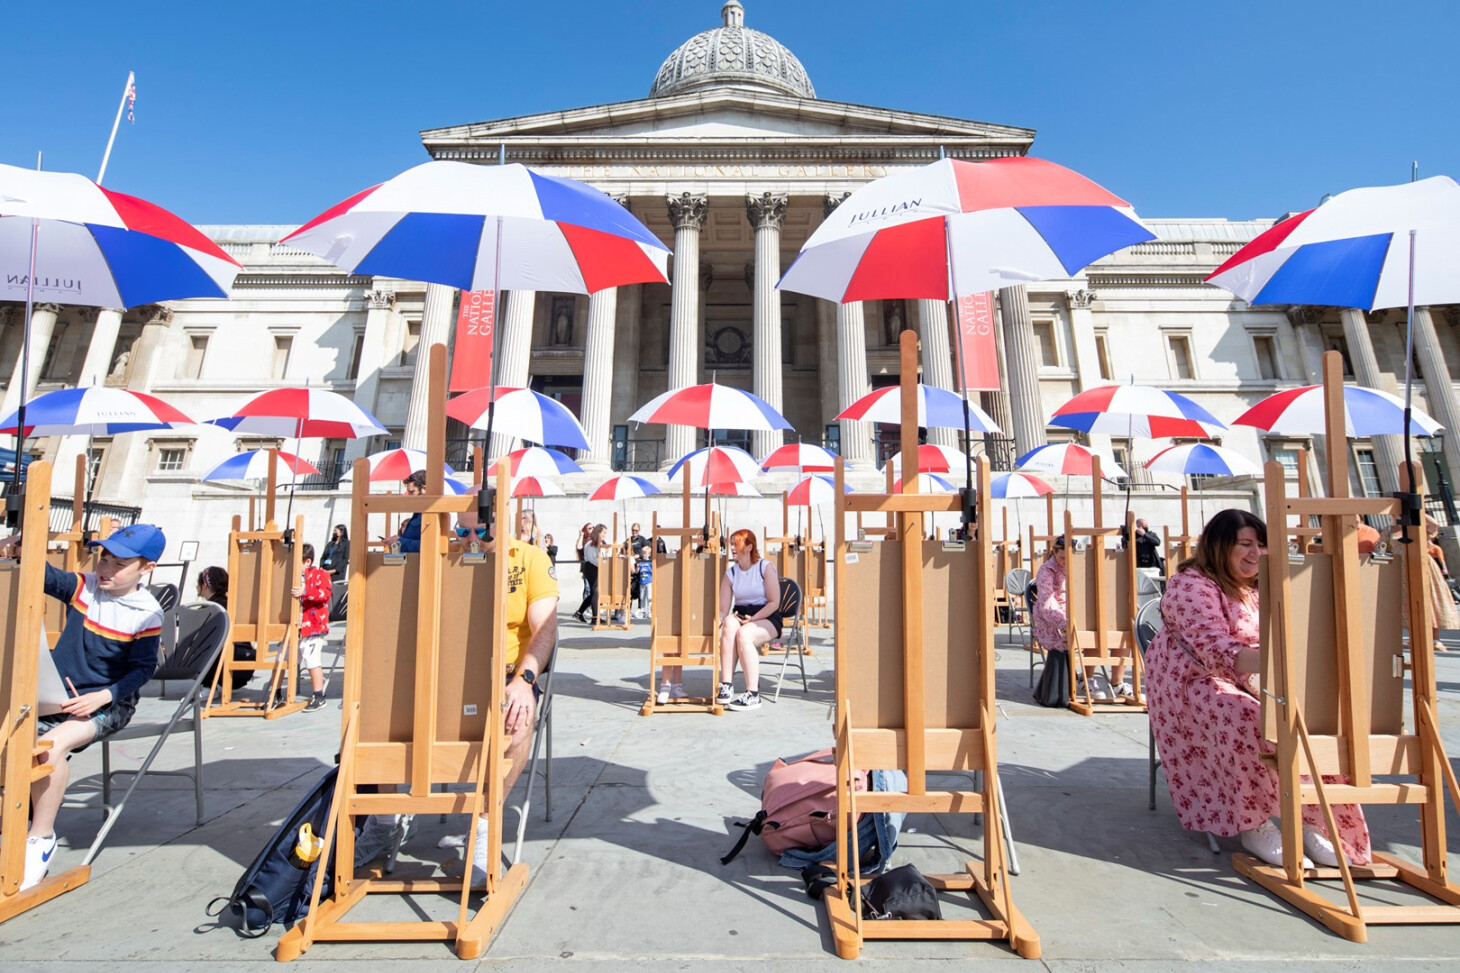 Immerse yourself in a festival of art, outside on Trafalgar Square